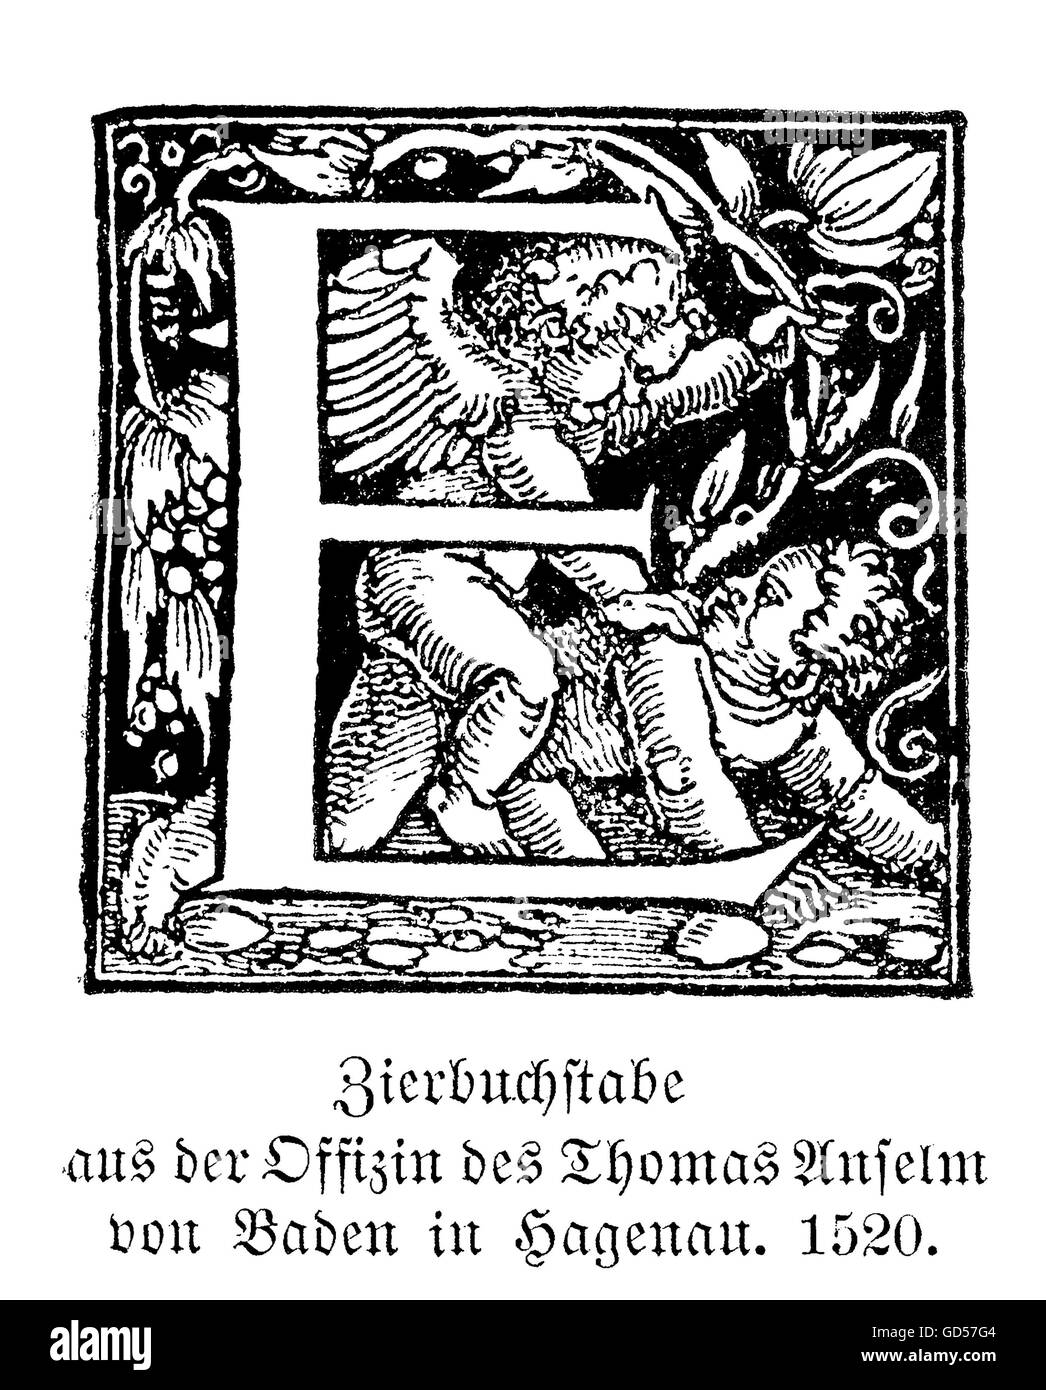 Swash letter E. 'Swash' were called the large decorated capital initials used in good typography at the beginning chapters until early XX century. From the typography workshop of Thomas Anselm von Baden in Hagenau, A.D. 1520. Stock Photo